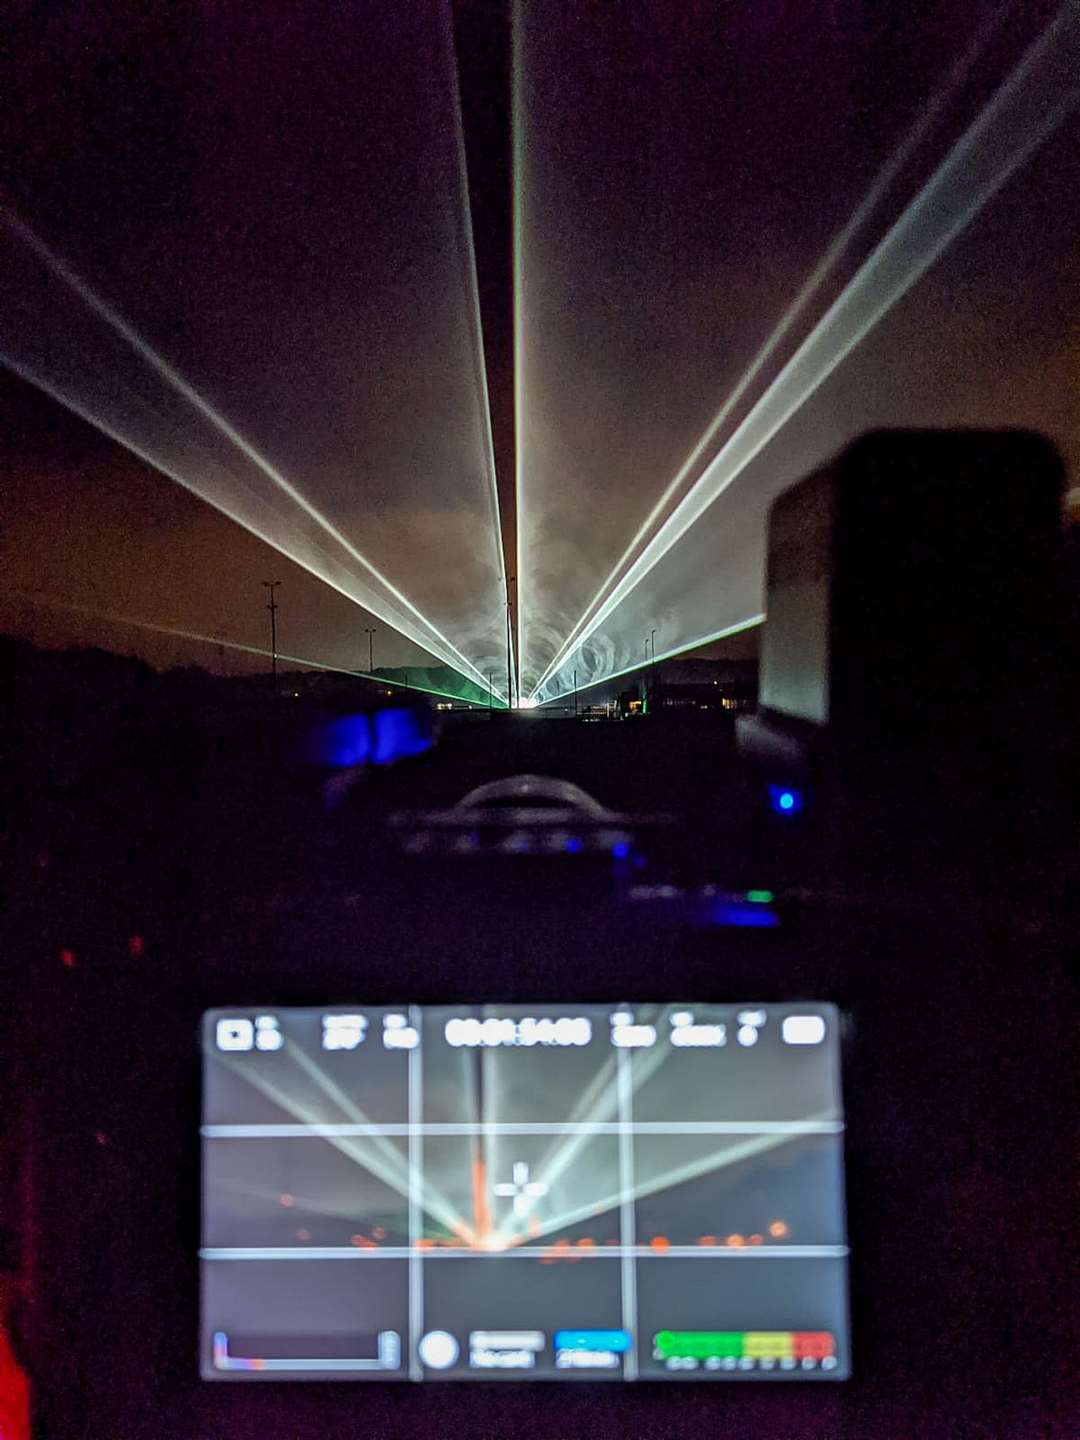 The laser show during the early hours over Medway